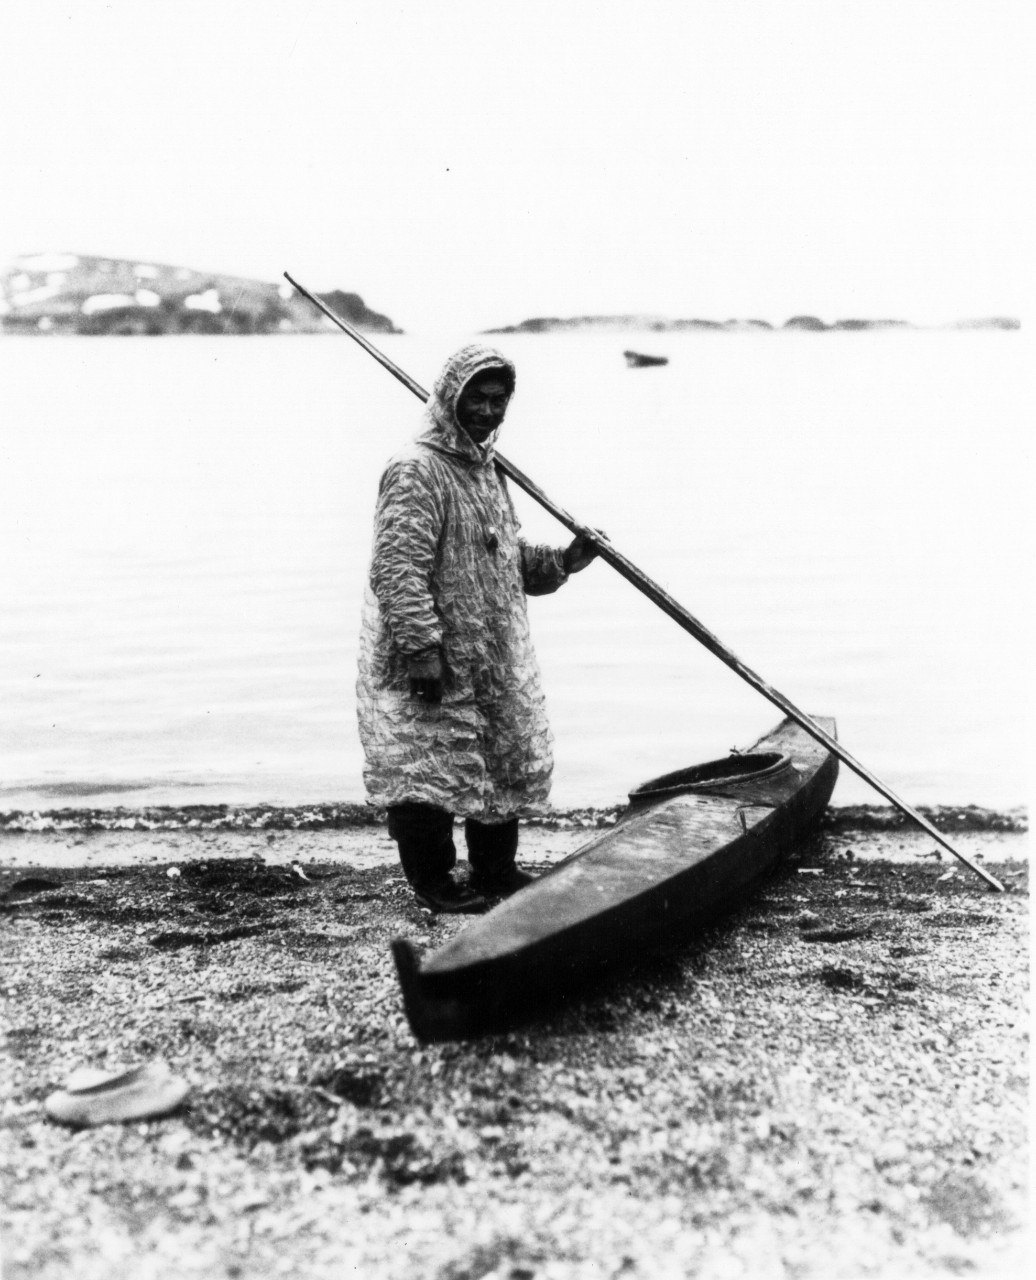 <p>UA 437.04.012 A native of the Aleutian Islands dressed in a &quot;Kamelika&quot; with a &quot;Bidarka&quot; or skin boat. In these frail craft the Aleutians have for centures navigated through the islands, even in winter.</p>
